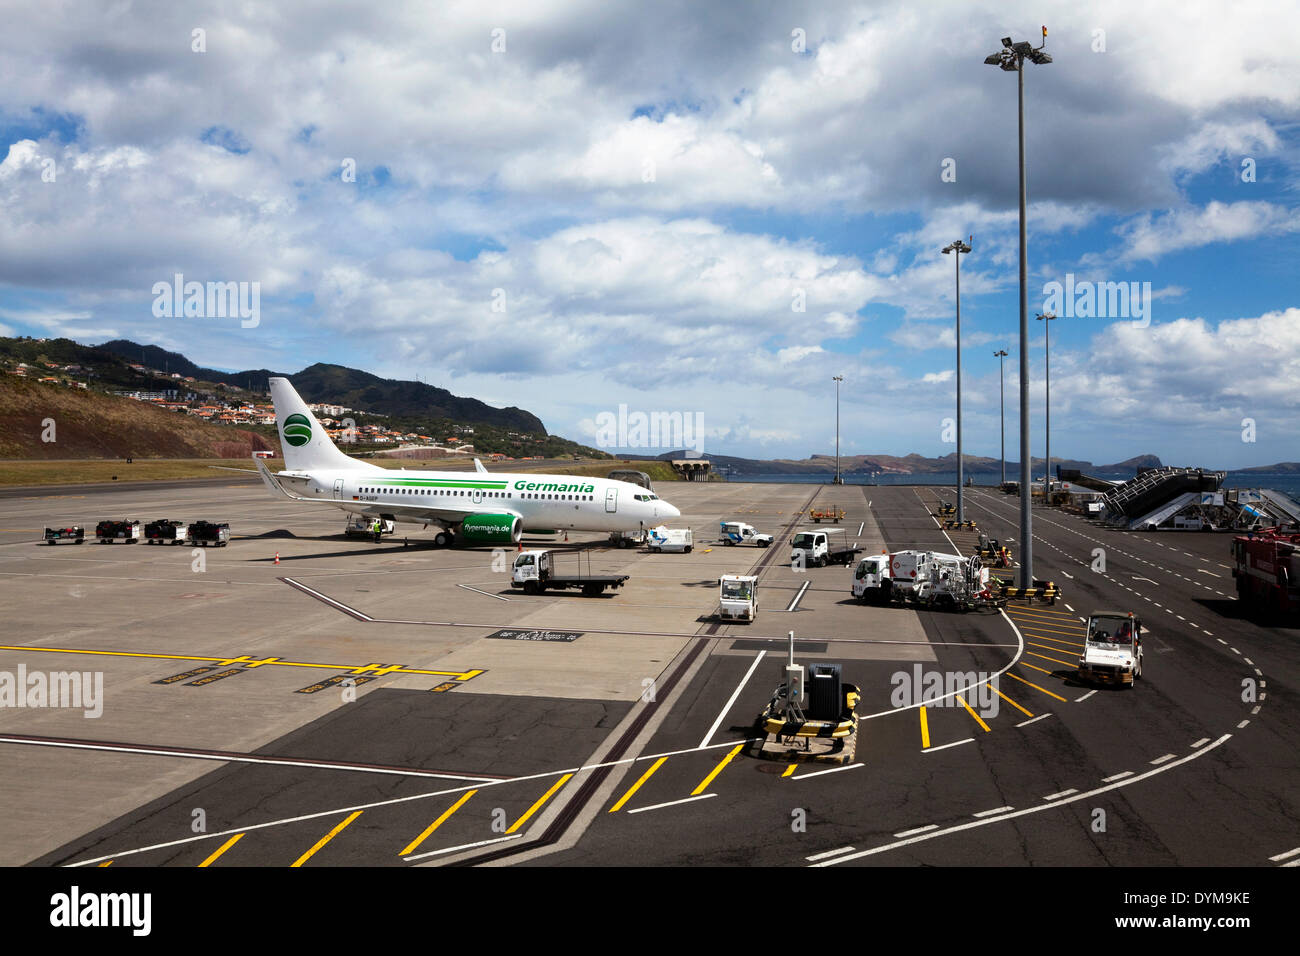 Aircraft of the Germania Airlines on the runway, Funchal Airport, Funchal, Madeira Island, Portugal Stock Photo